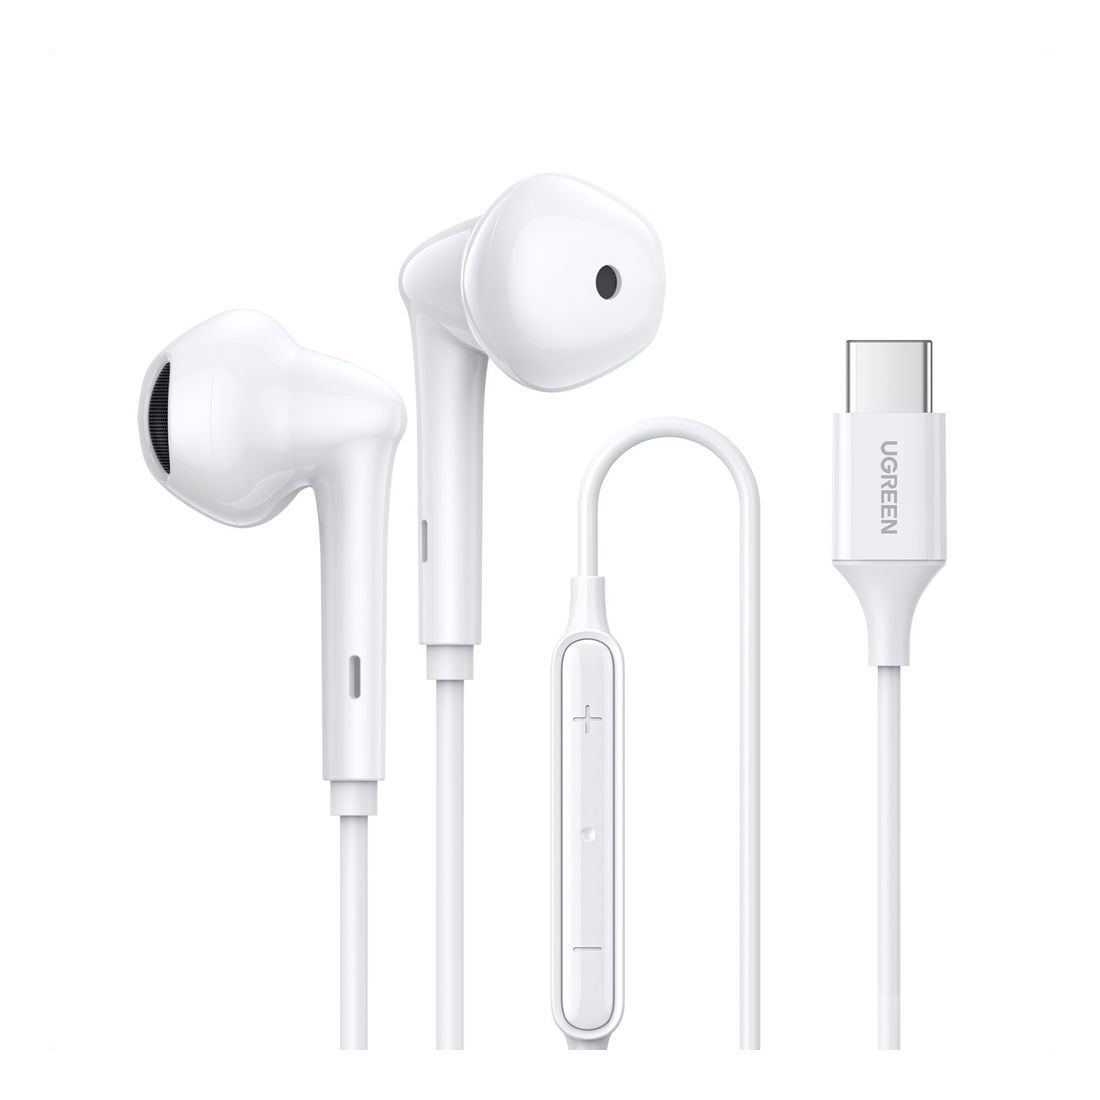 UGreen Wired Earphones with Type-C Connector - White